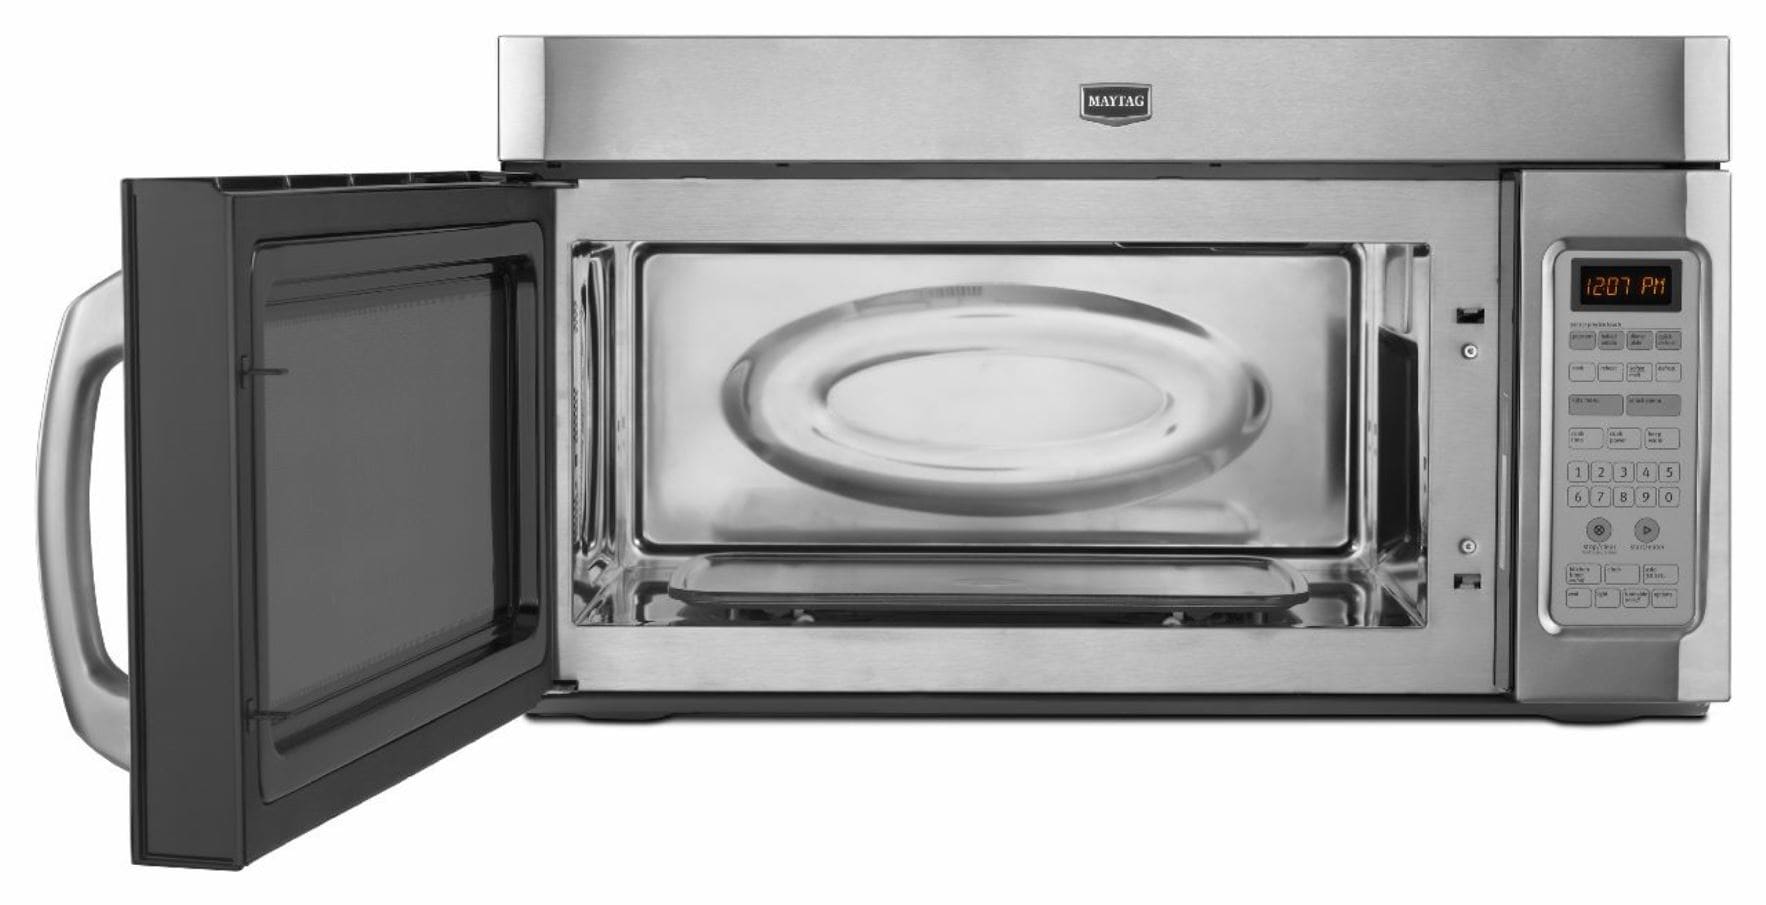 Maytag MMV6180WS 1.8 cu. ft. Over-The-Range Microwave with 1100 Watts,  Five-Speed 300 CFM Venting System, 10 Power Levels, Sensor and Convection  Cooking Options, Stainless Steel Interior and Incandescent Cooktop  Lighting: Stainless Steel